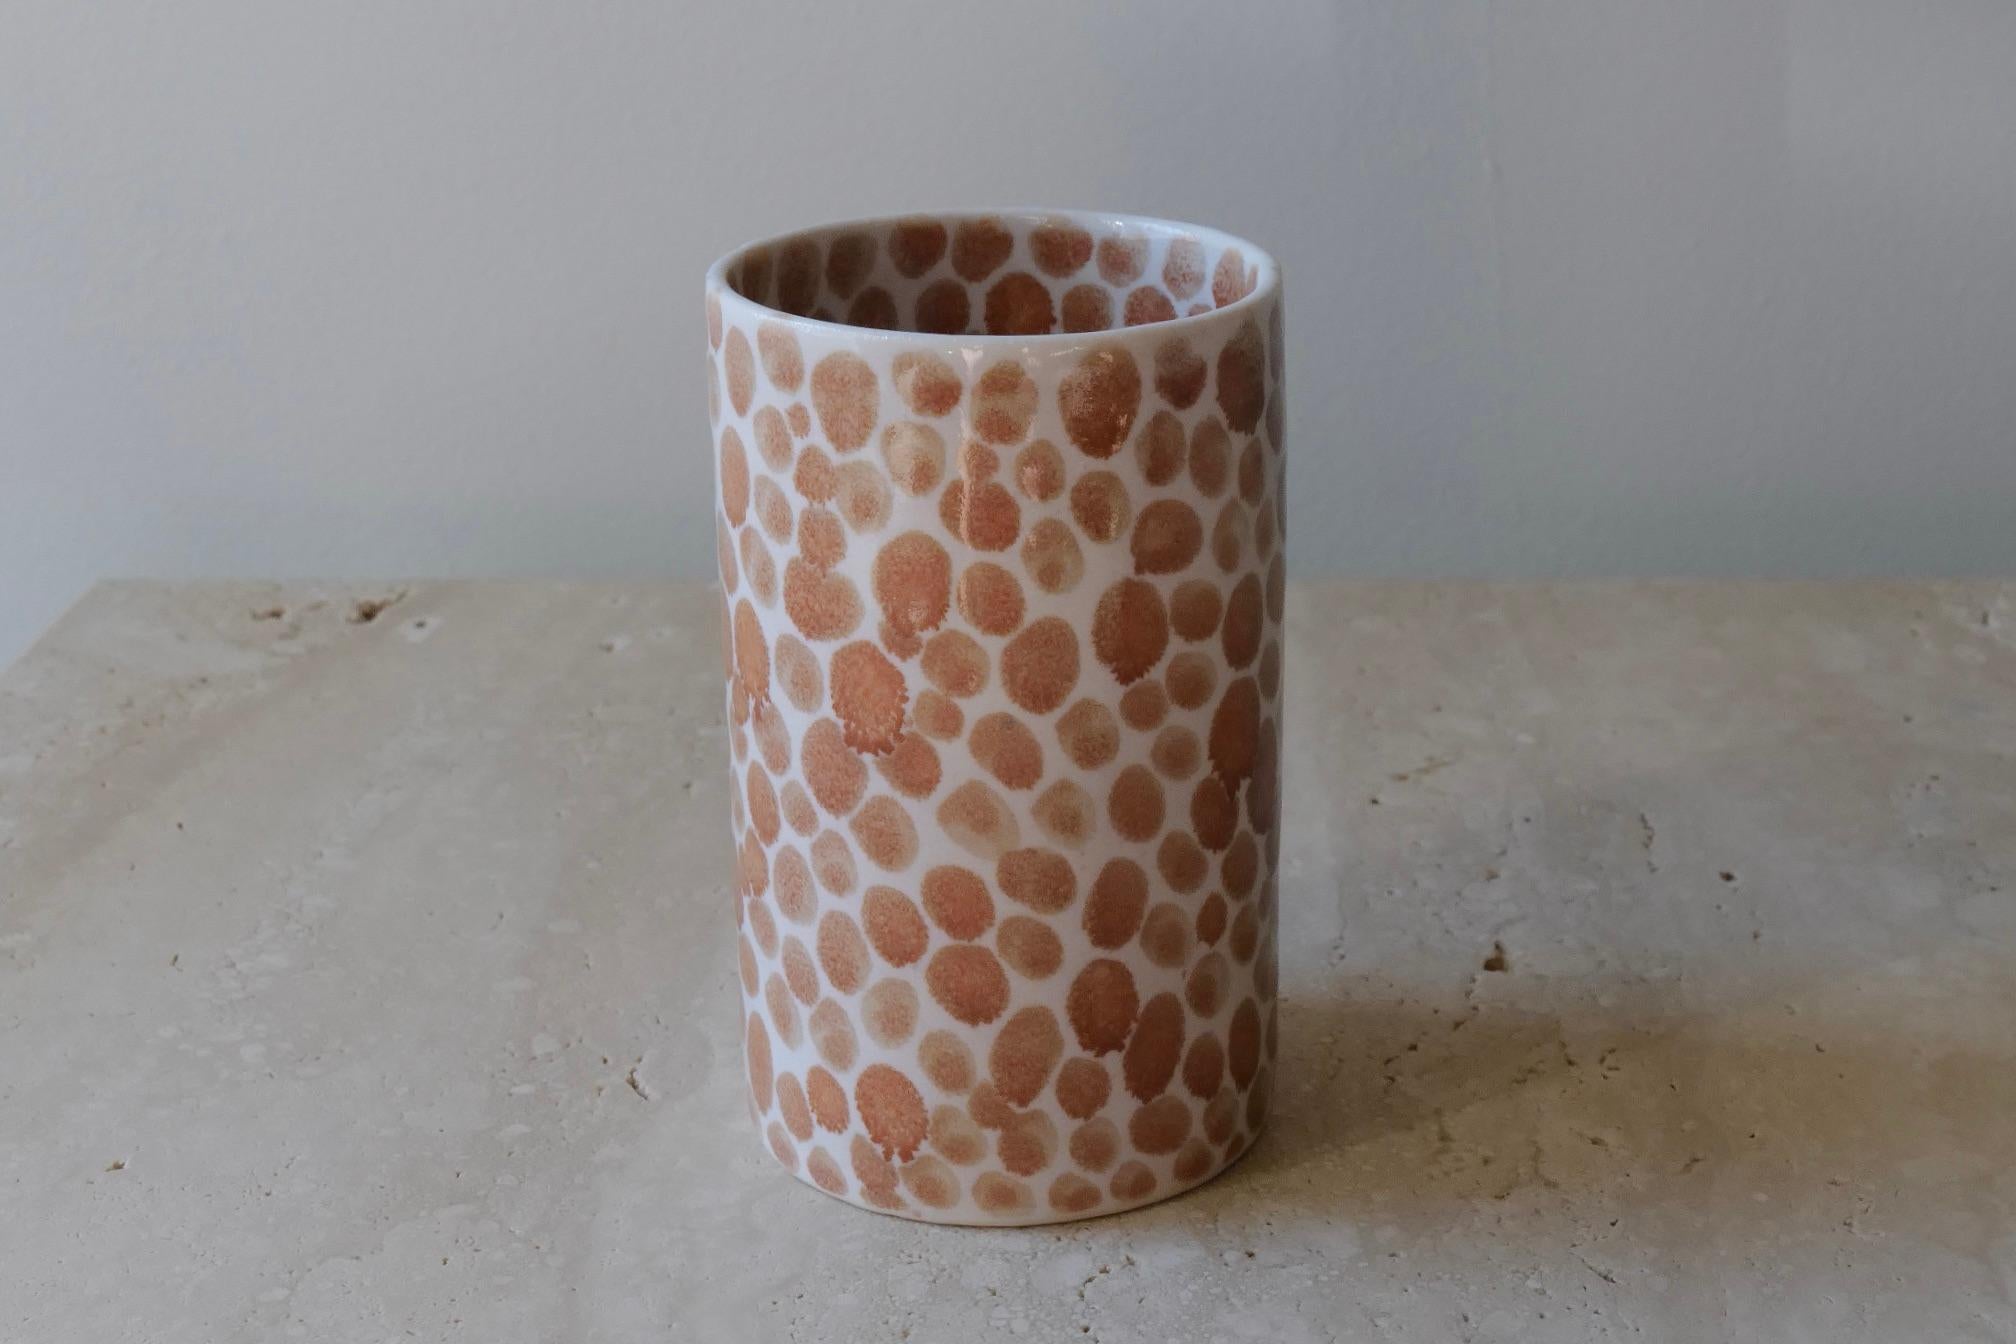 Ceramic drinking cup. Hand-cast in porcelain and once bisque fired, each dot is hand-painted with a tan glaze. An unconventional layered glazing technique, developed by the artist, is used in these cast porcelain pieces. The straight walls and sleek